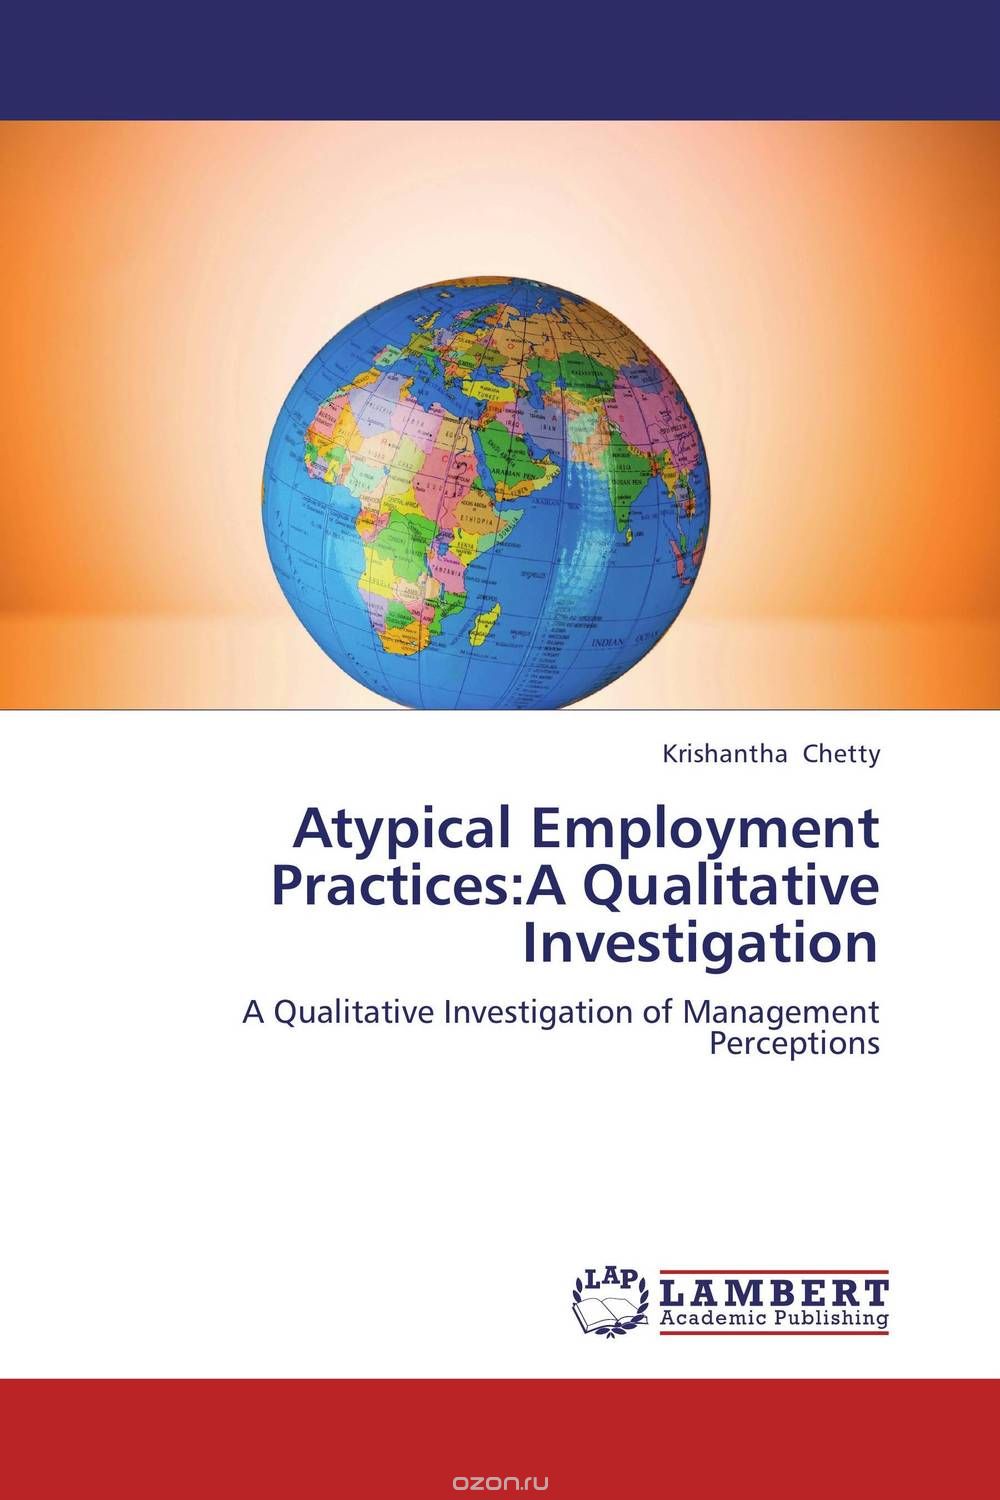 Atypical Employment Practices:A Qualitative Investigation